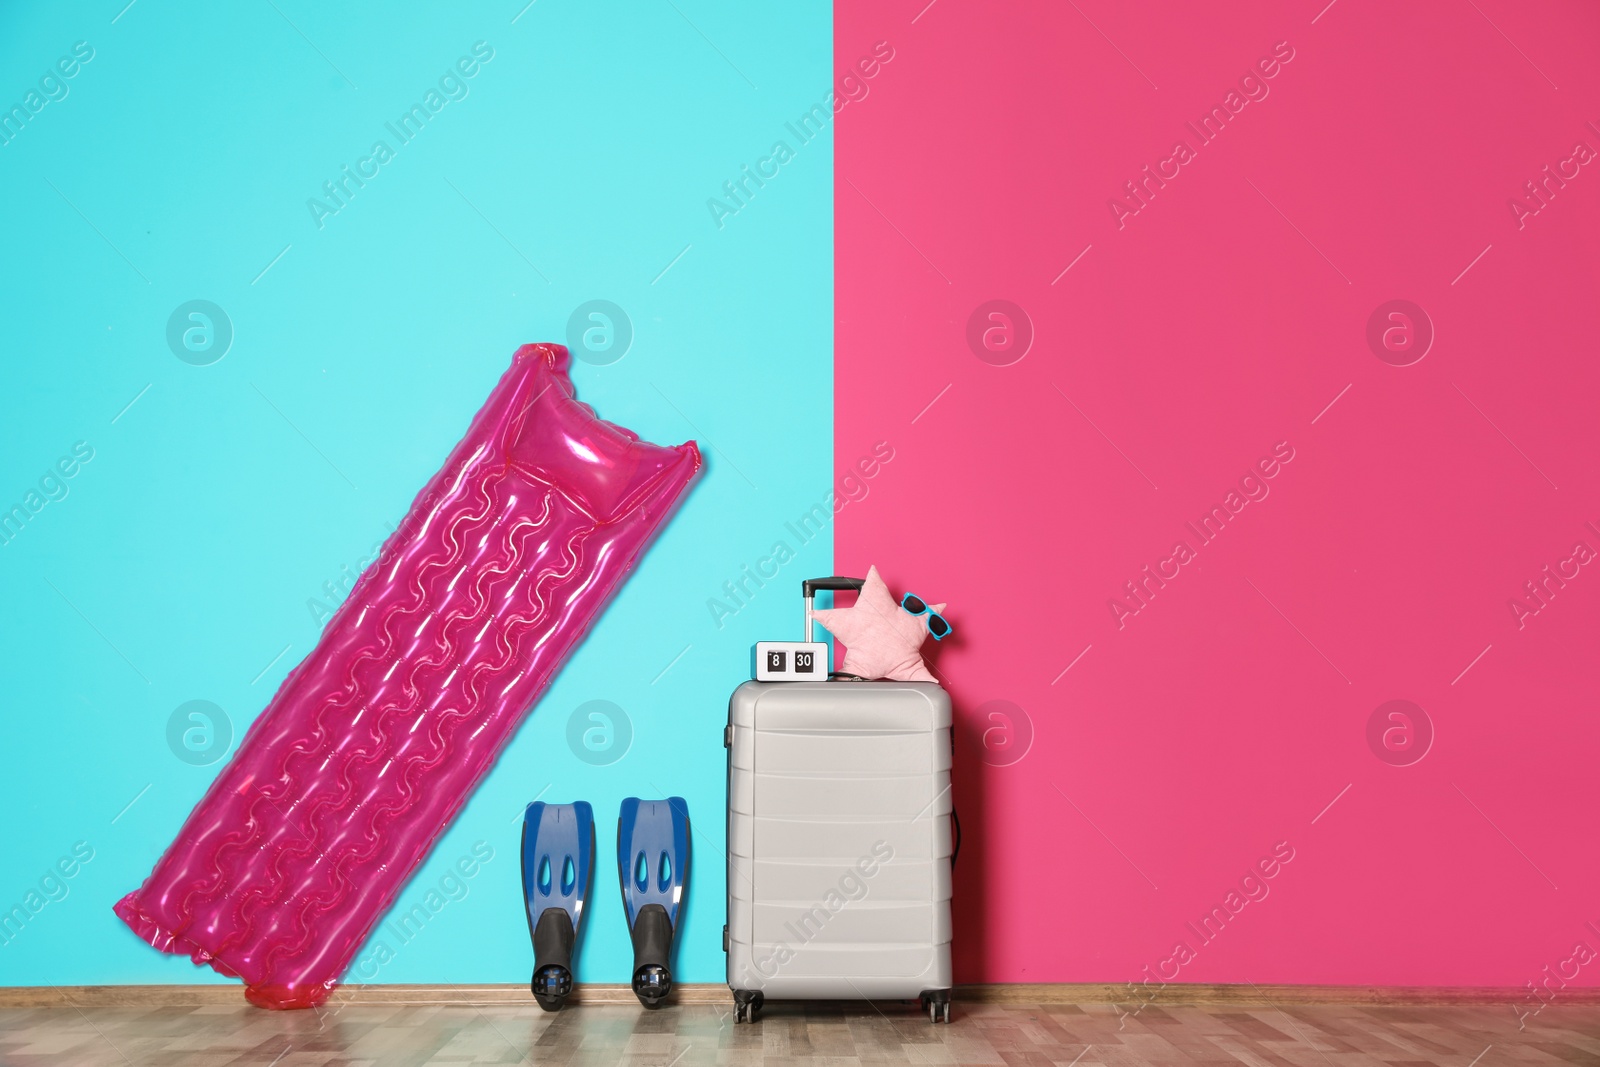 Photo of Large suitcase for travelling and beach items with space for text near color wall